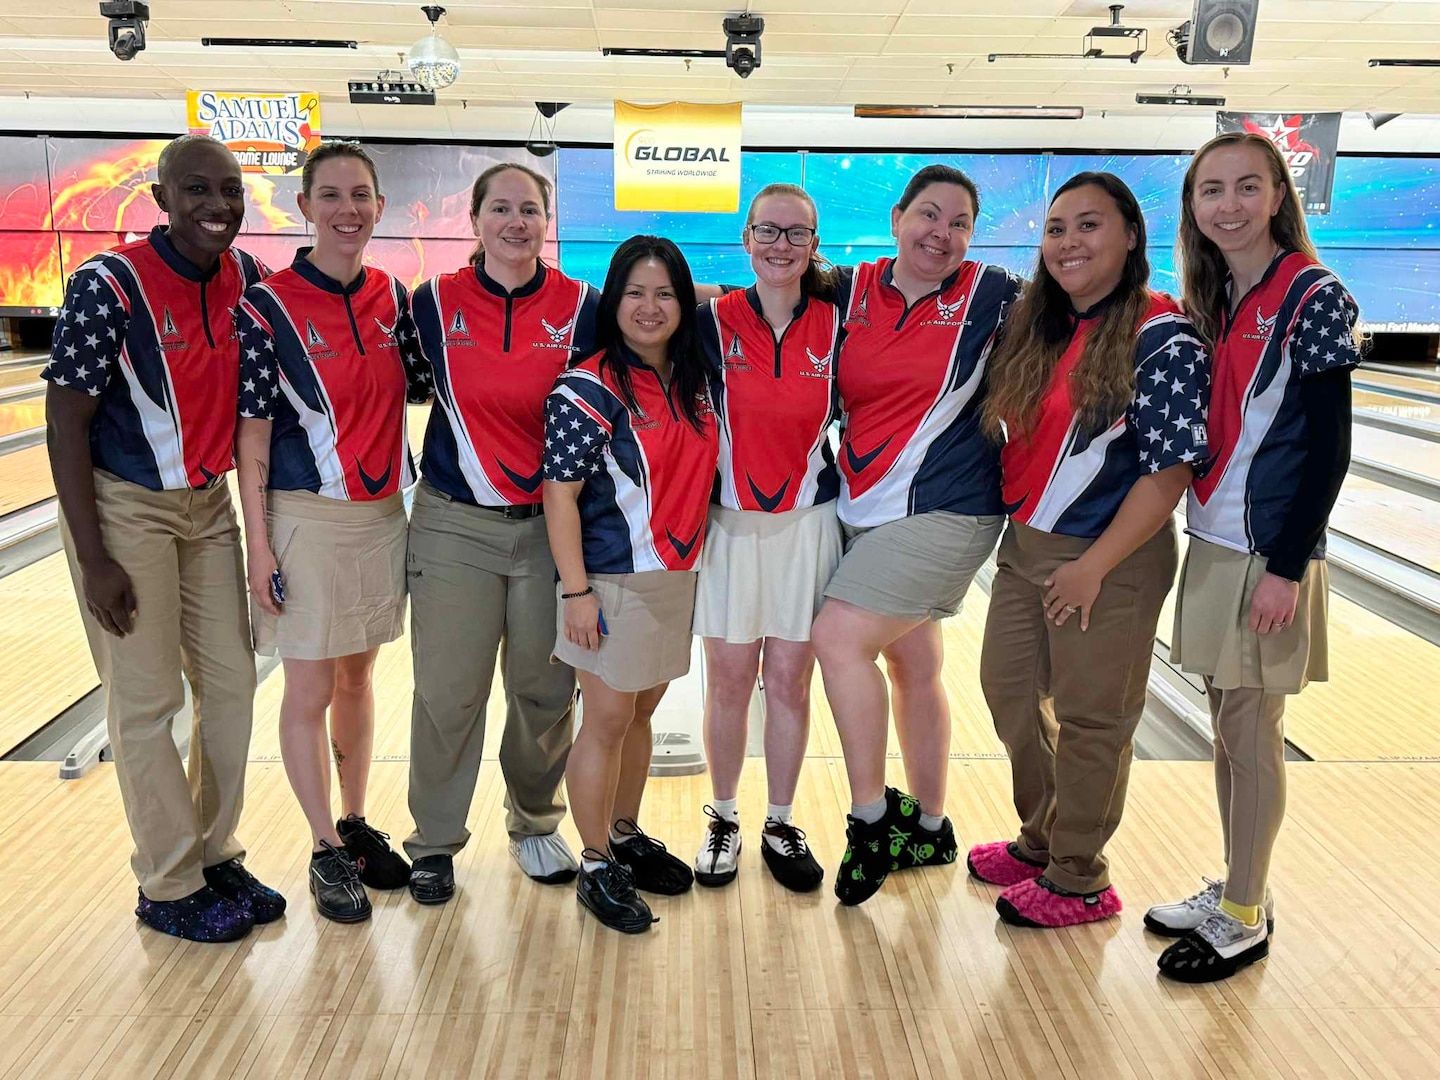 Female group photo of women wearing bowling uniforms at a bowling alley in front of bowling lanes